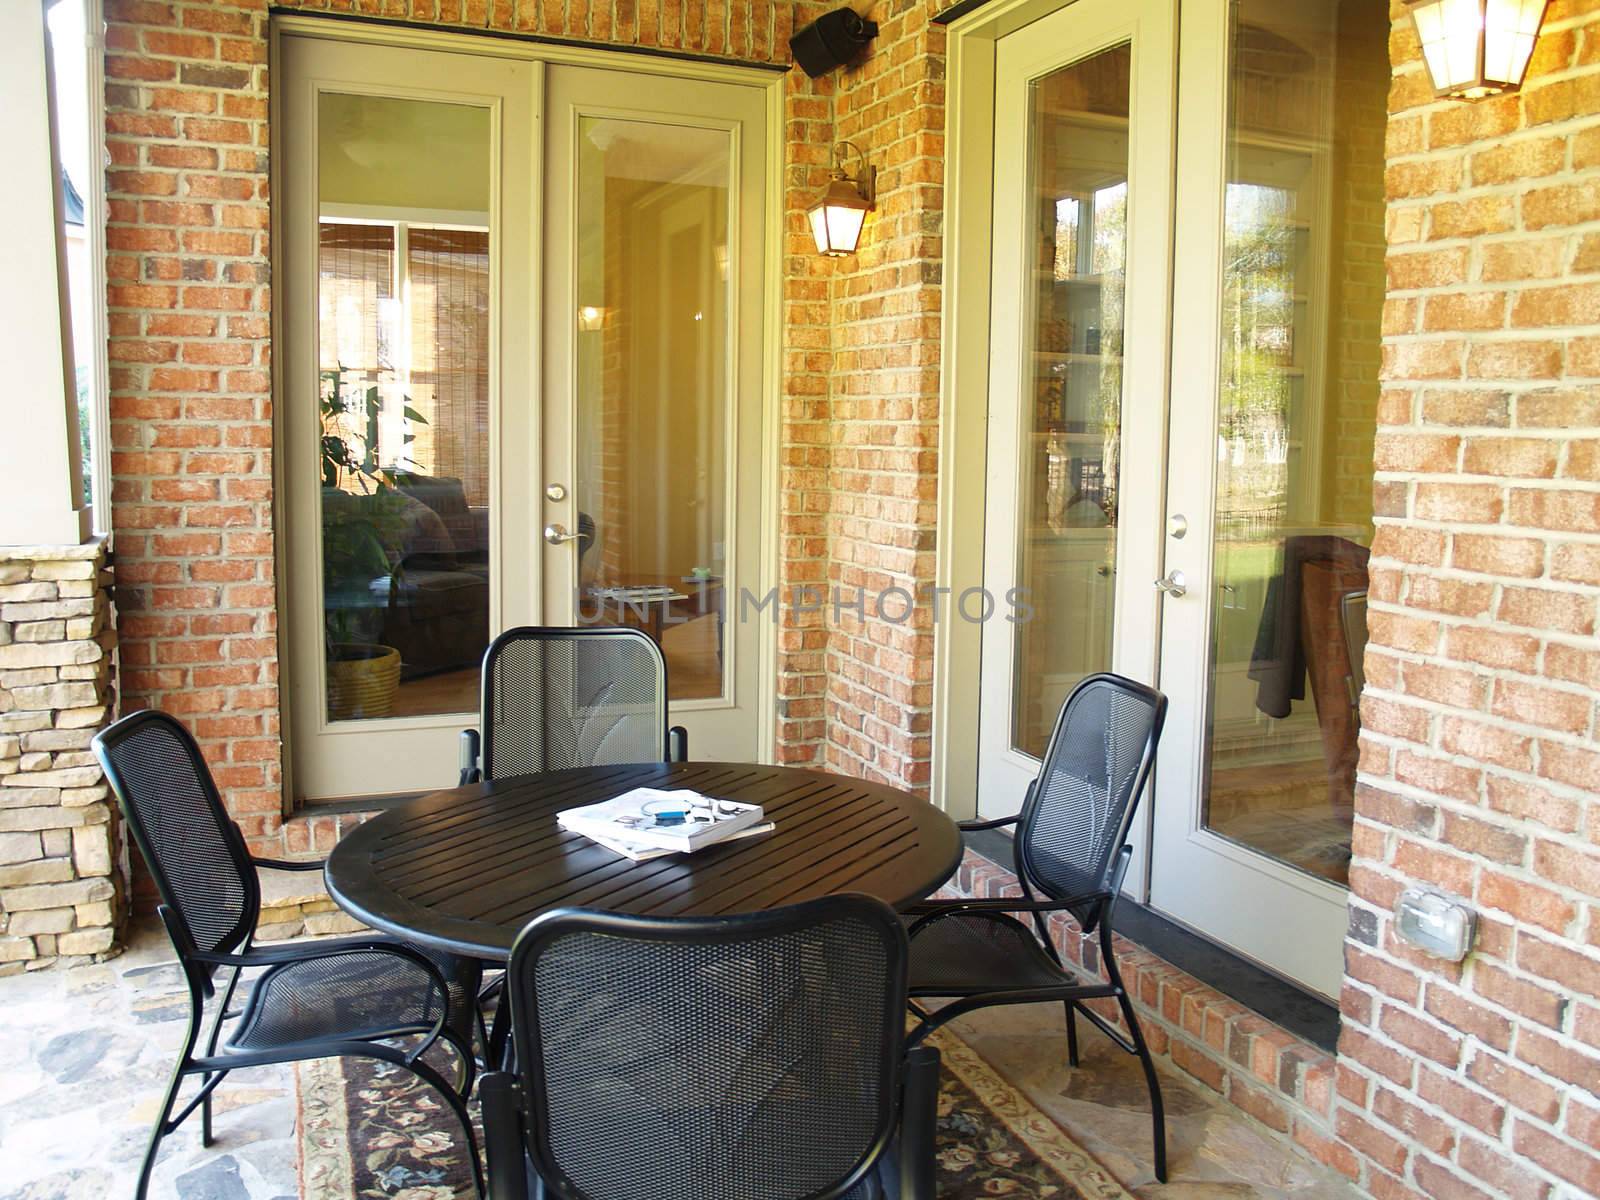 A wood and metal table and chairs on a covered stone patio on an american brick home. Two large glass french doors open up to the house in the background